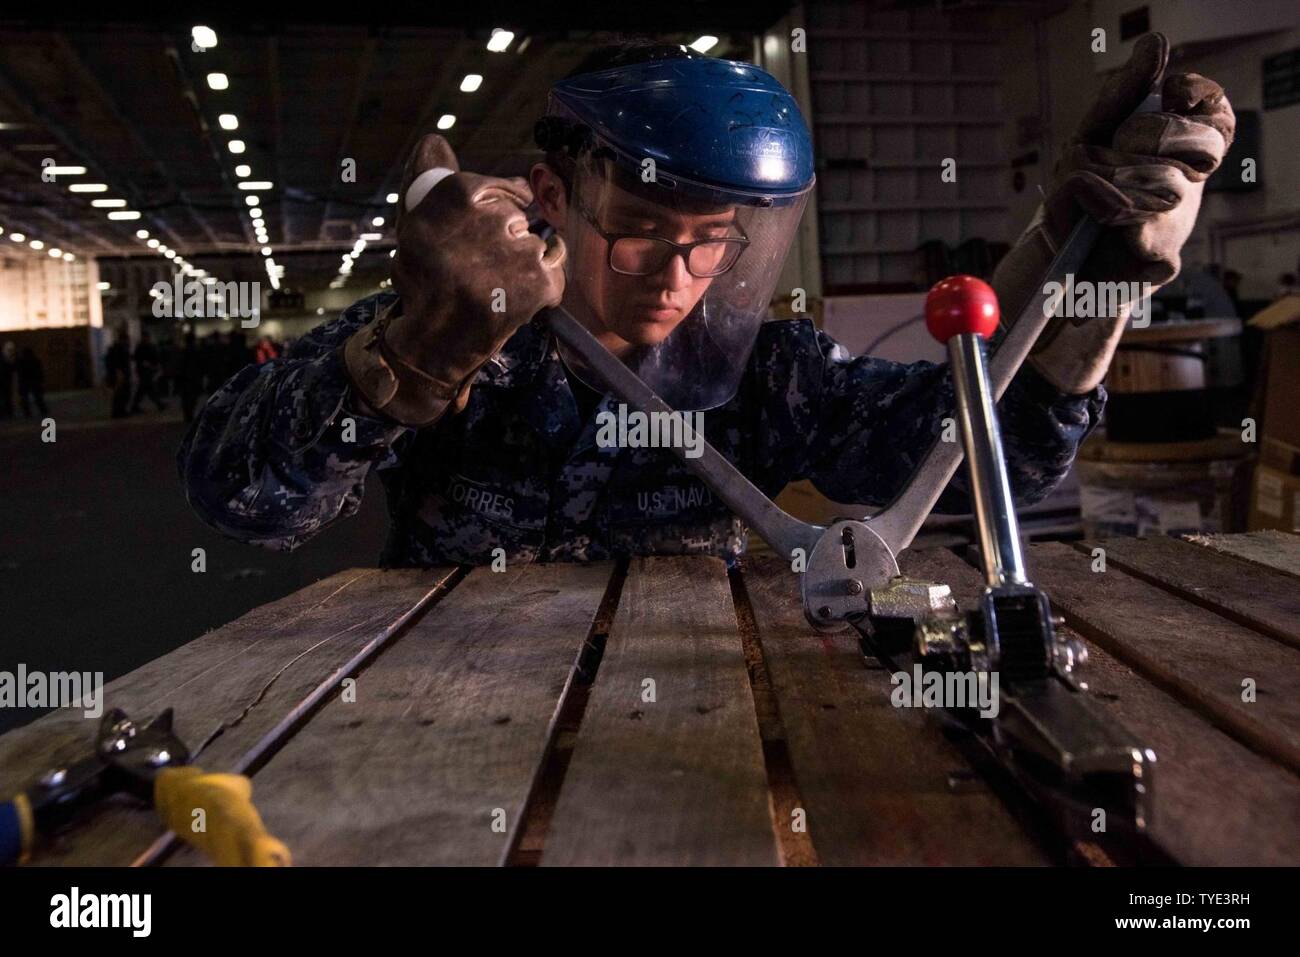 Washington (Nov. 3, 2016) Petty Officer 3rd Class Miguel Torres, from University Place, Washington, secures banding to a stack of pallets in USS John C. Stennis' (CVN 74) hangar bay. John C. Stennis is conducting a scheduled maintenance availability at Naval Base Kitsap-Bremerton. Stock Photo